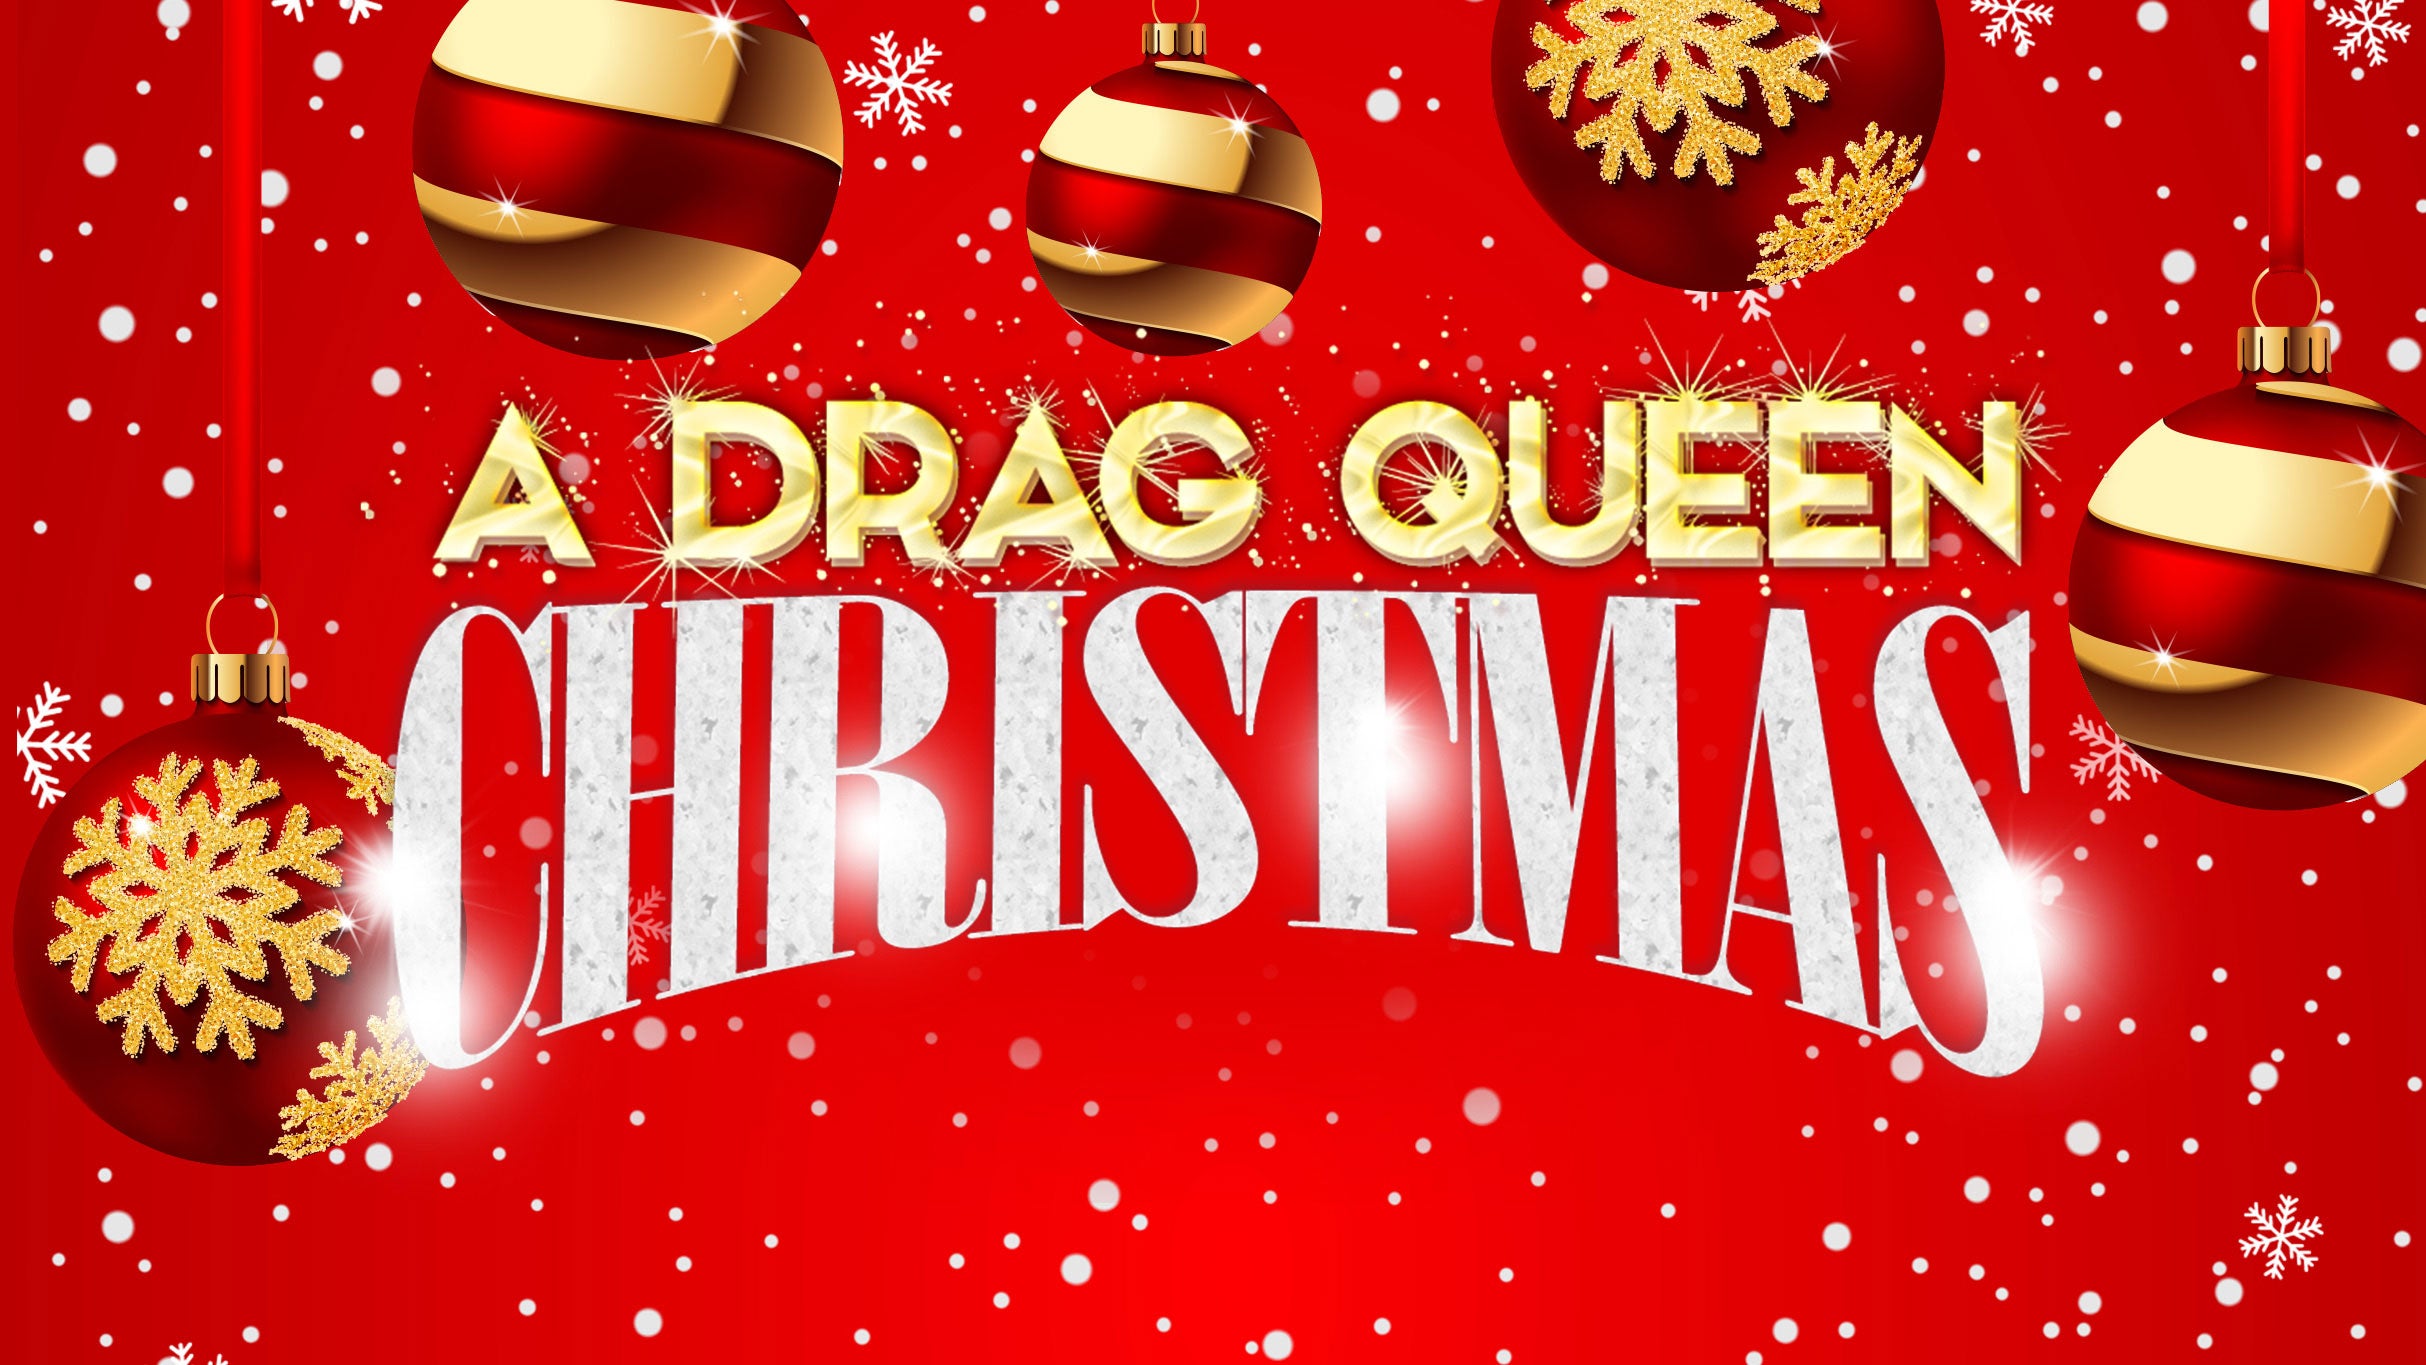 A Drag Queen Christmas (18+) presale code for early tickets in Pittsburgh